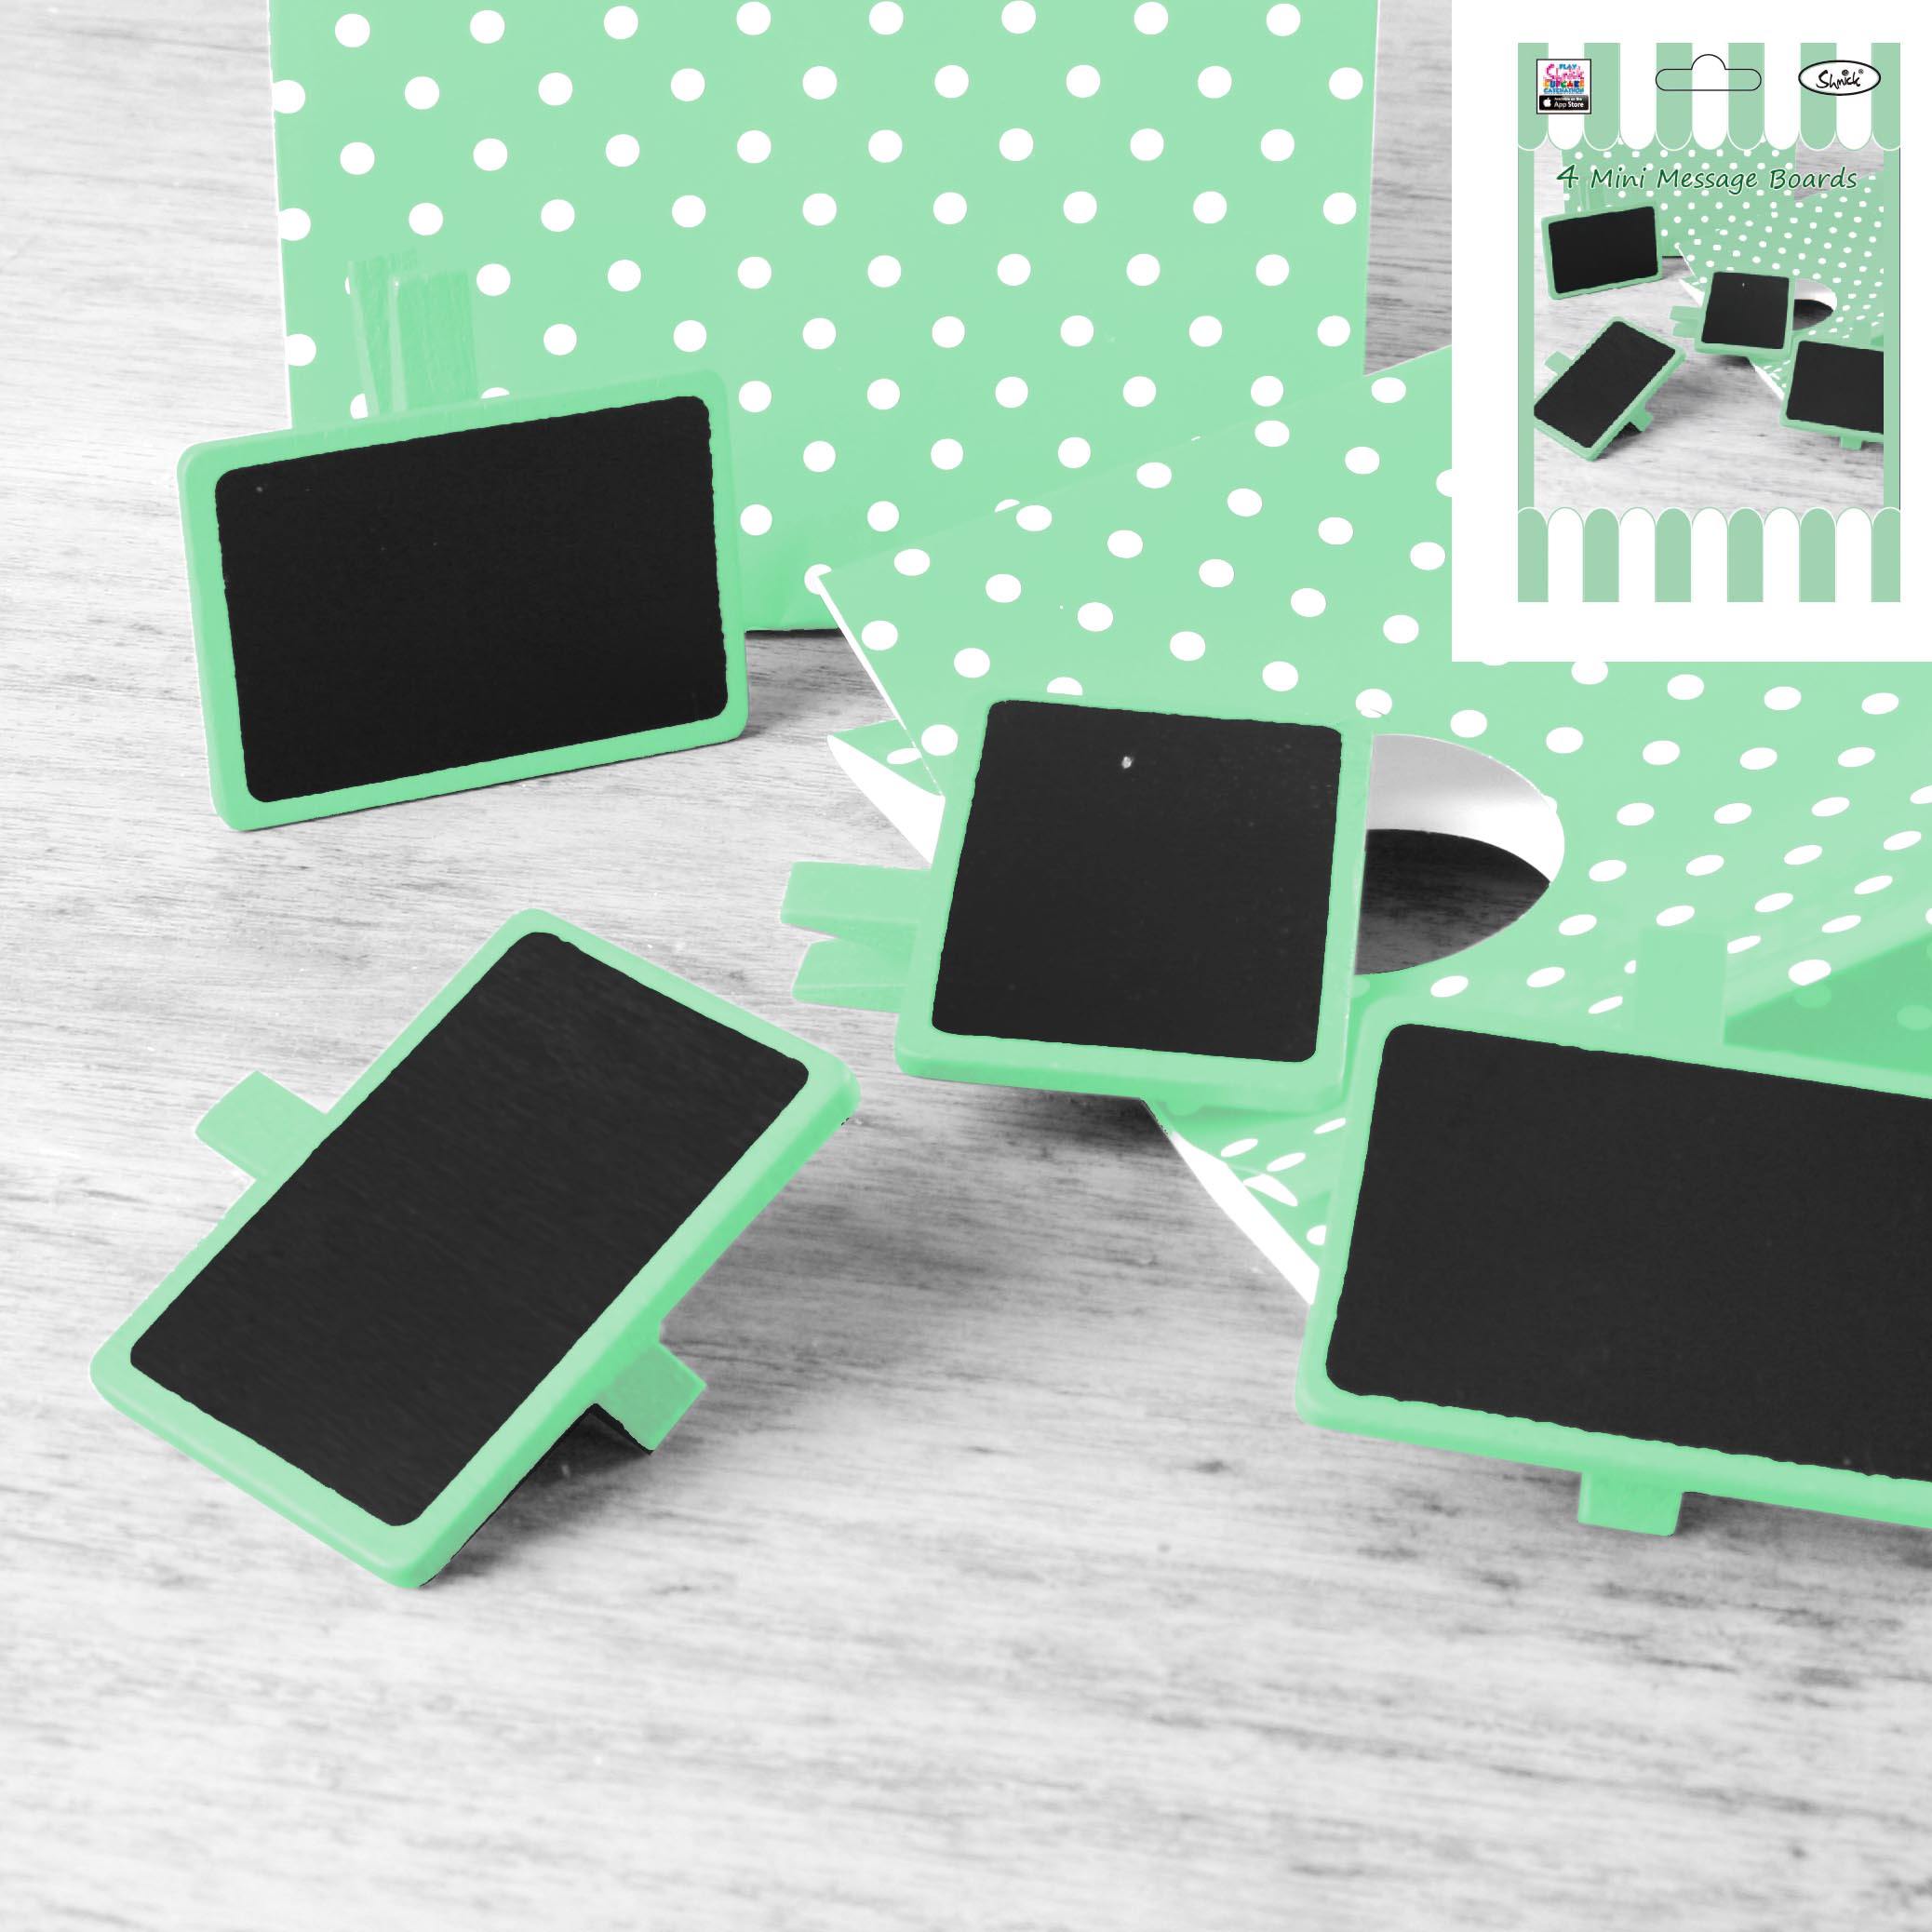 4 Pack Green Mini Message Board - The Base Warehouse